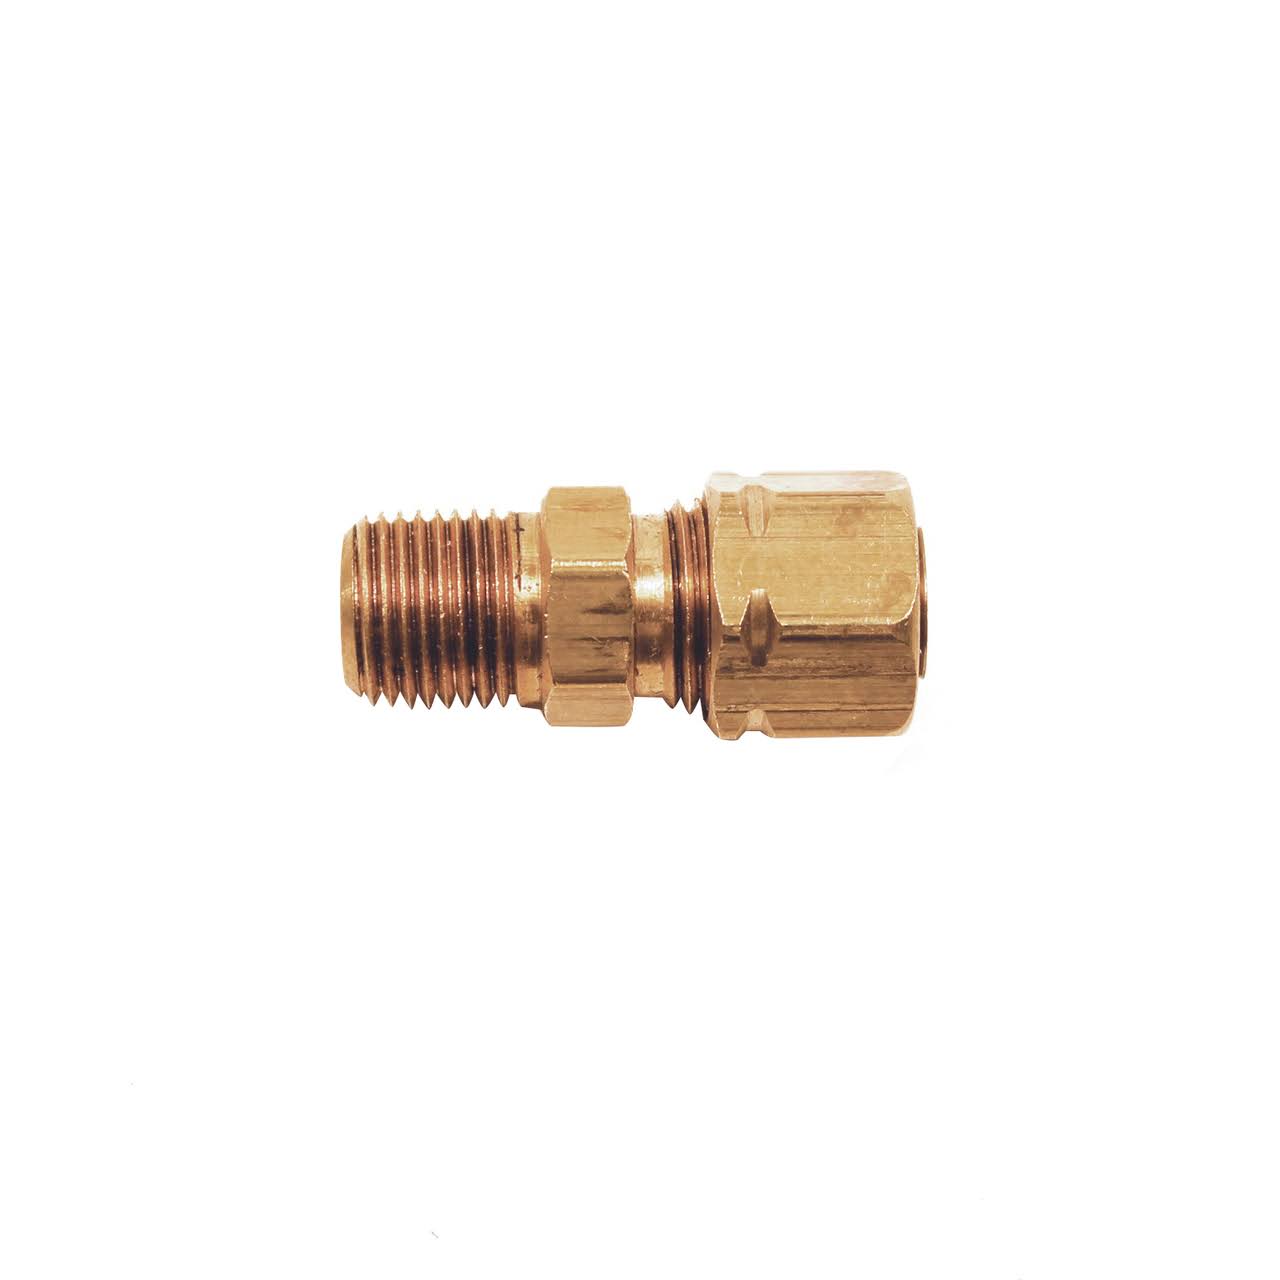 Bennett Marine Connector Fitting, 1/8" Pipe to 1/4" Tube VP1146